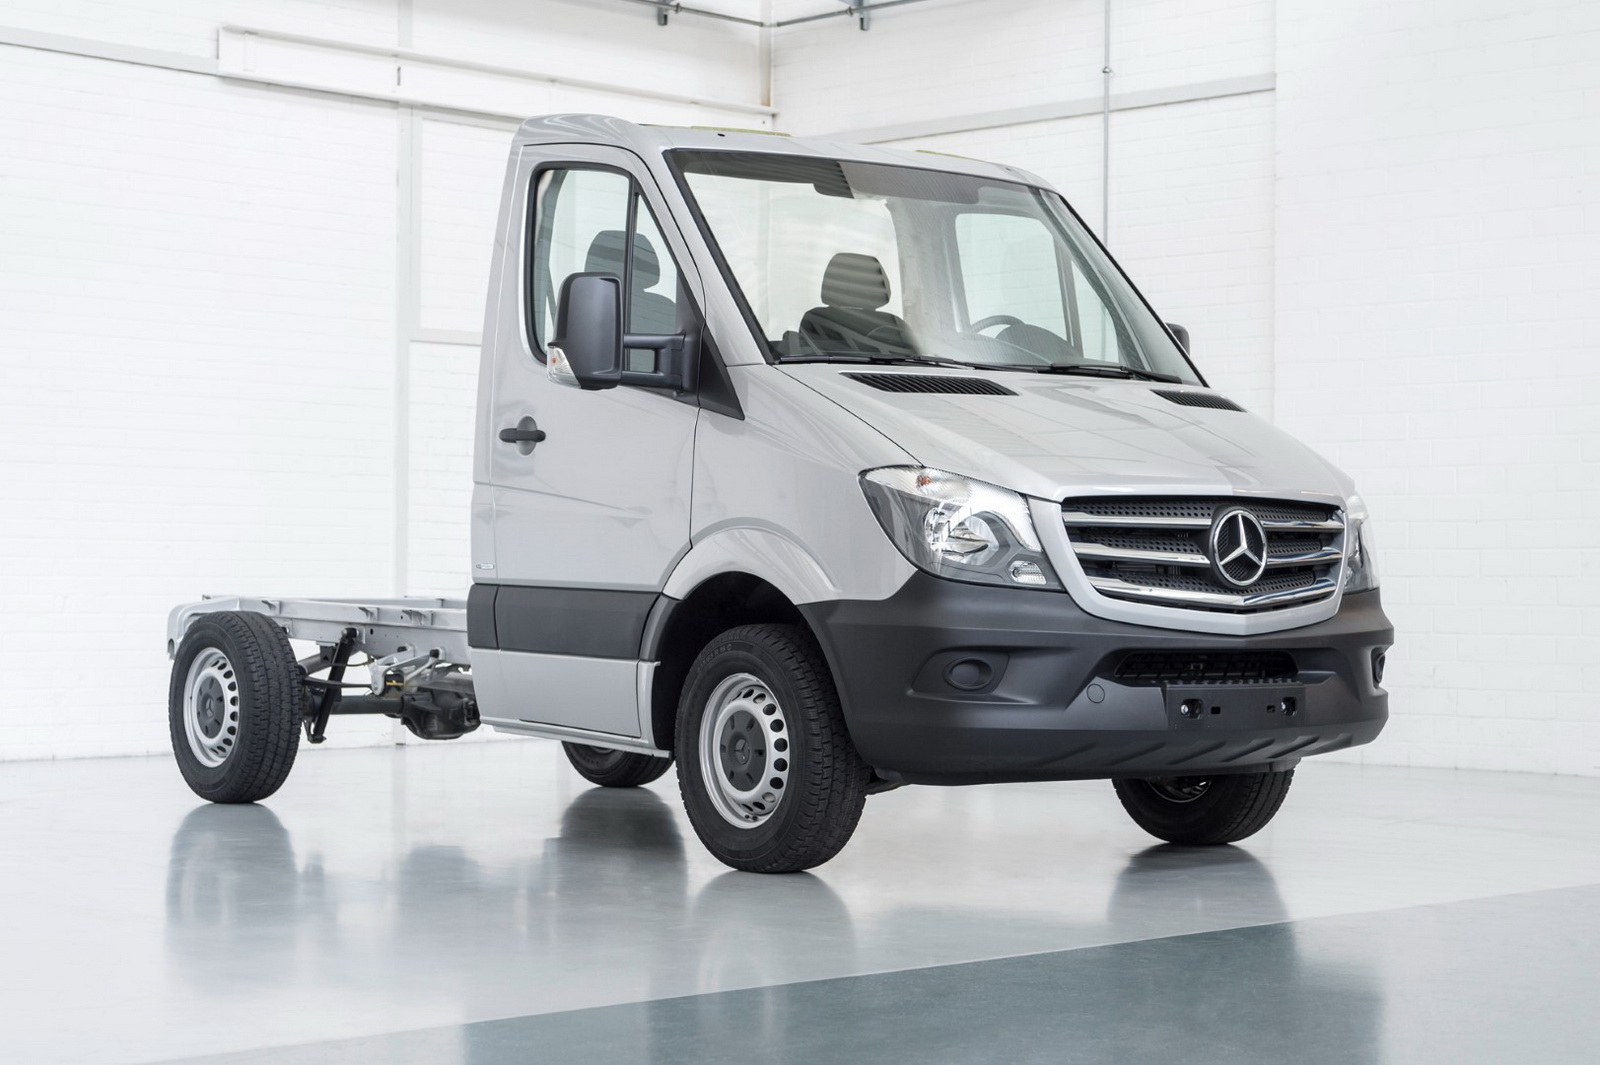 Mercedes Sprinter Hits 3 Million Sales In 20 Years | Carscoops